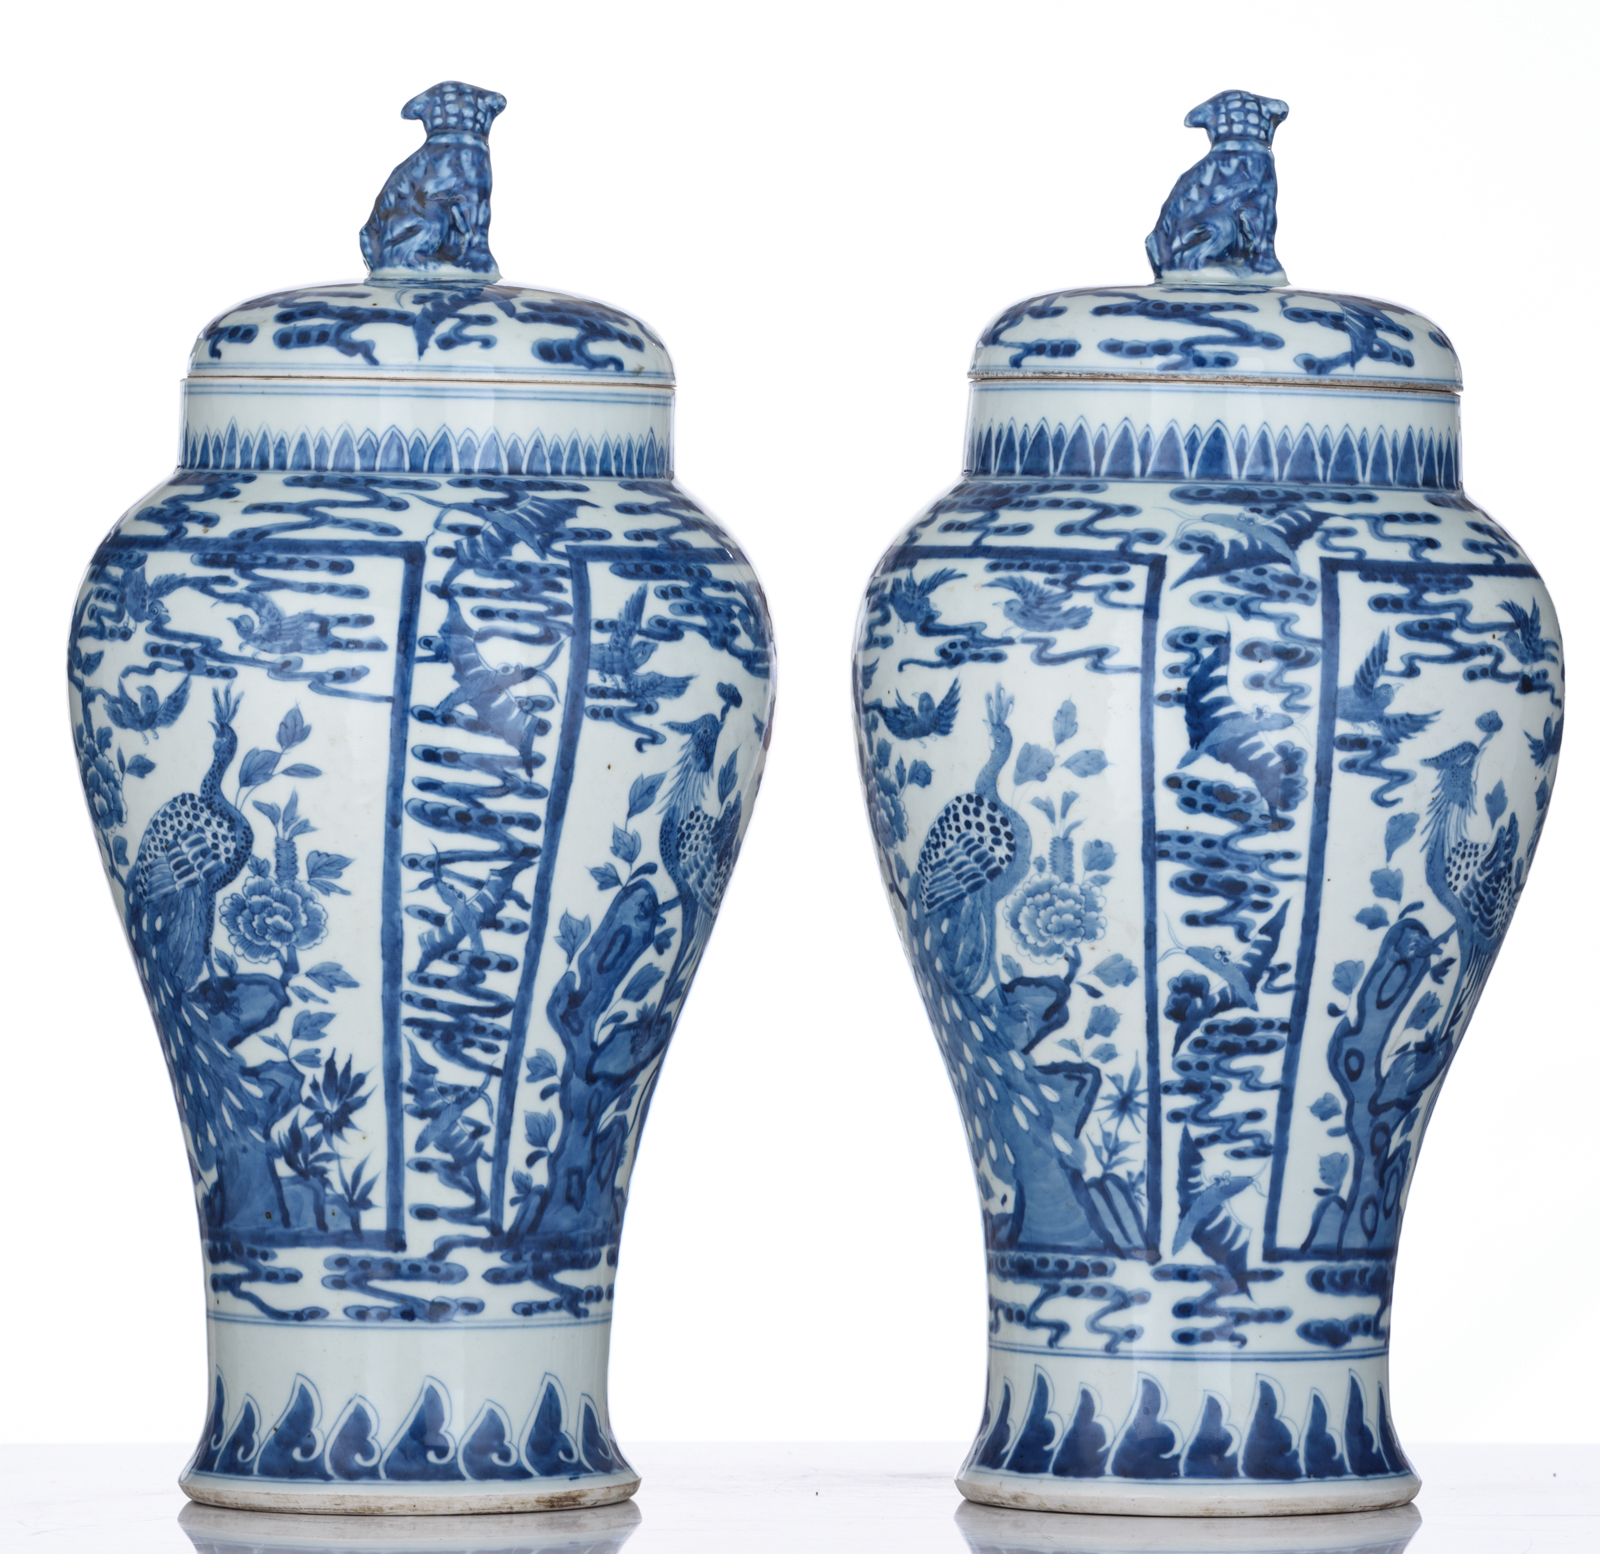 A pair of Chinese blue and white vases and covers, decorated with birds and flowers, 19thC, H 43 cm - Image 3 of 8